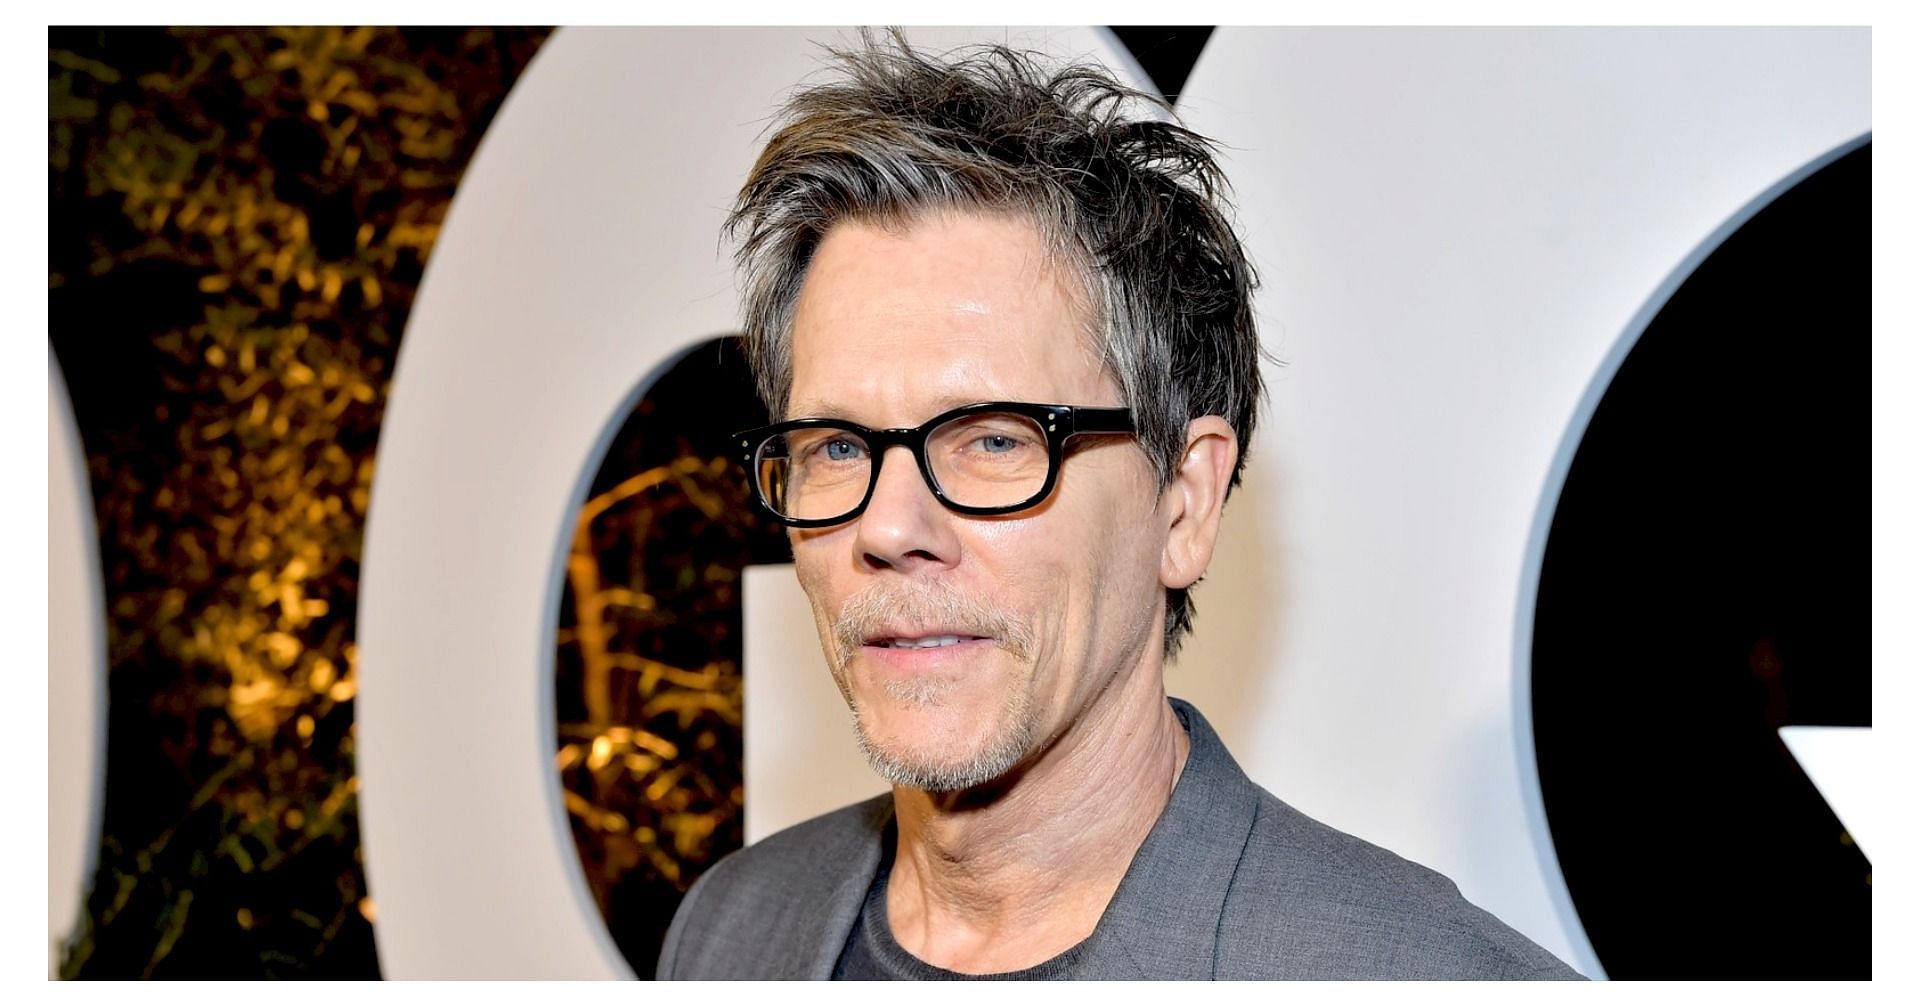 Kevin Bacon pro-drag dance video goes viral (Image via Getty Images)